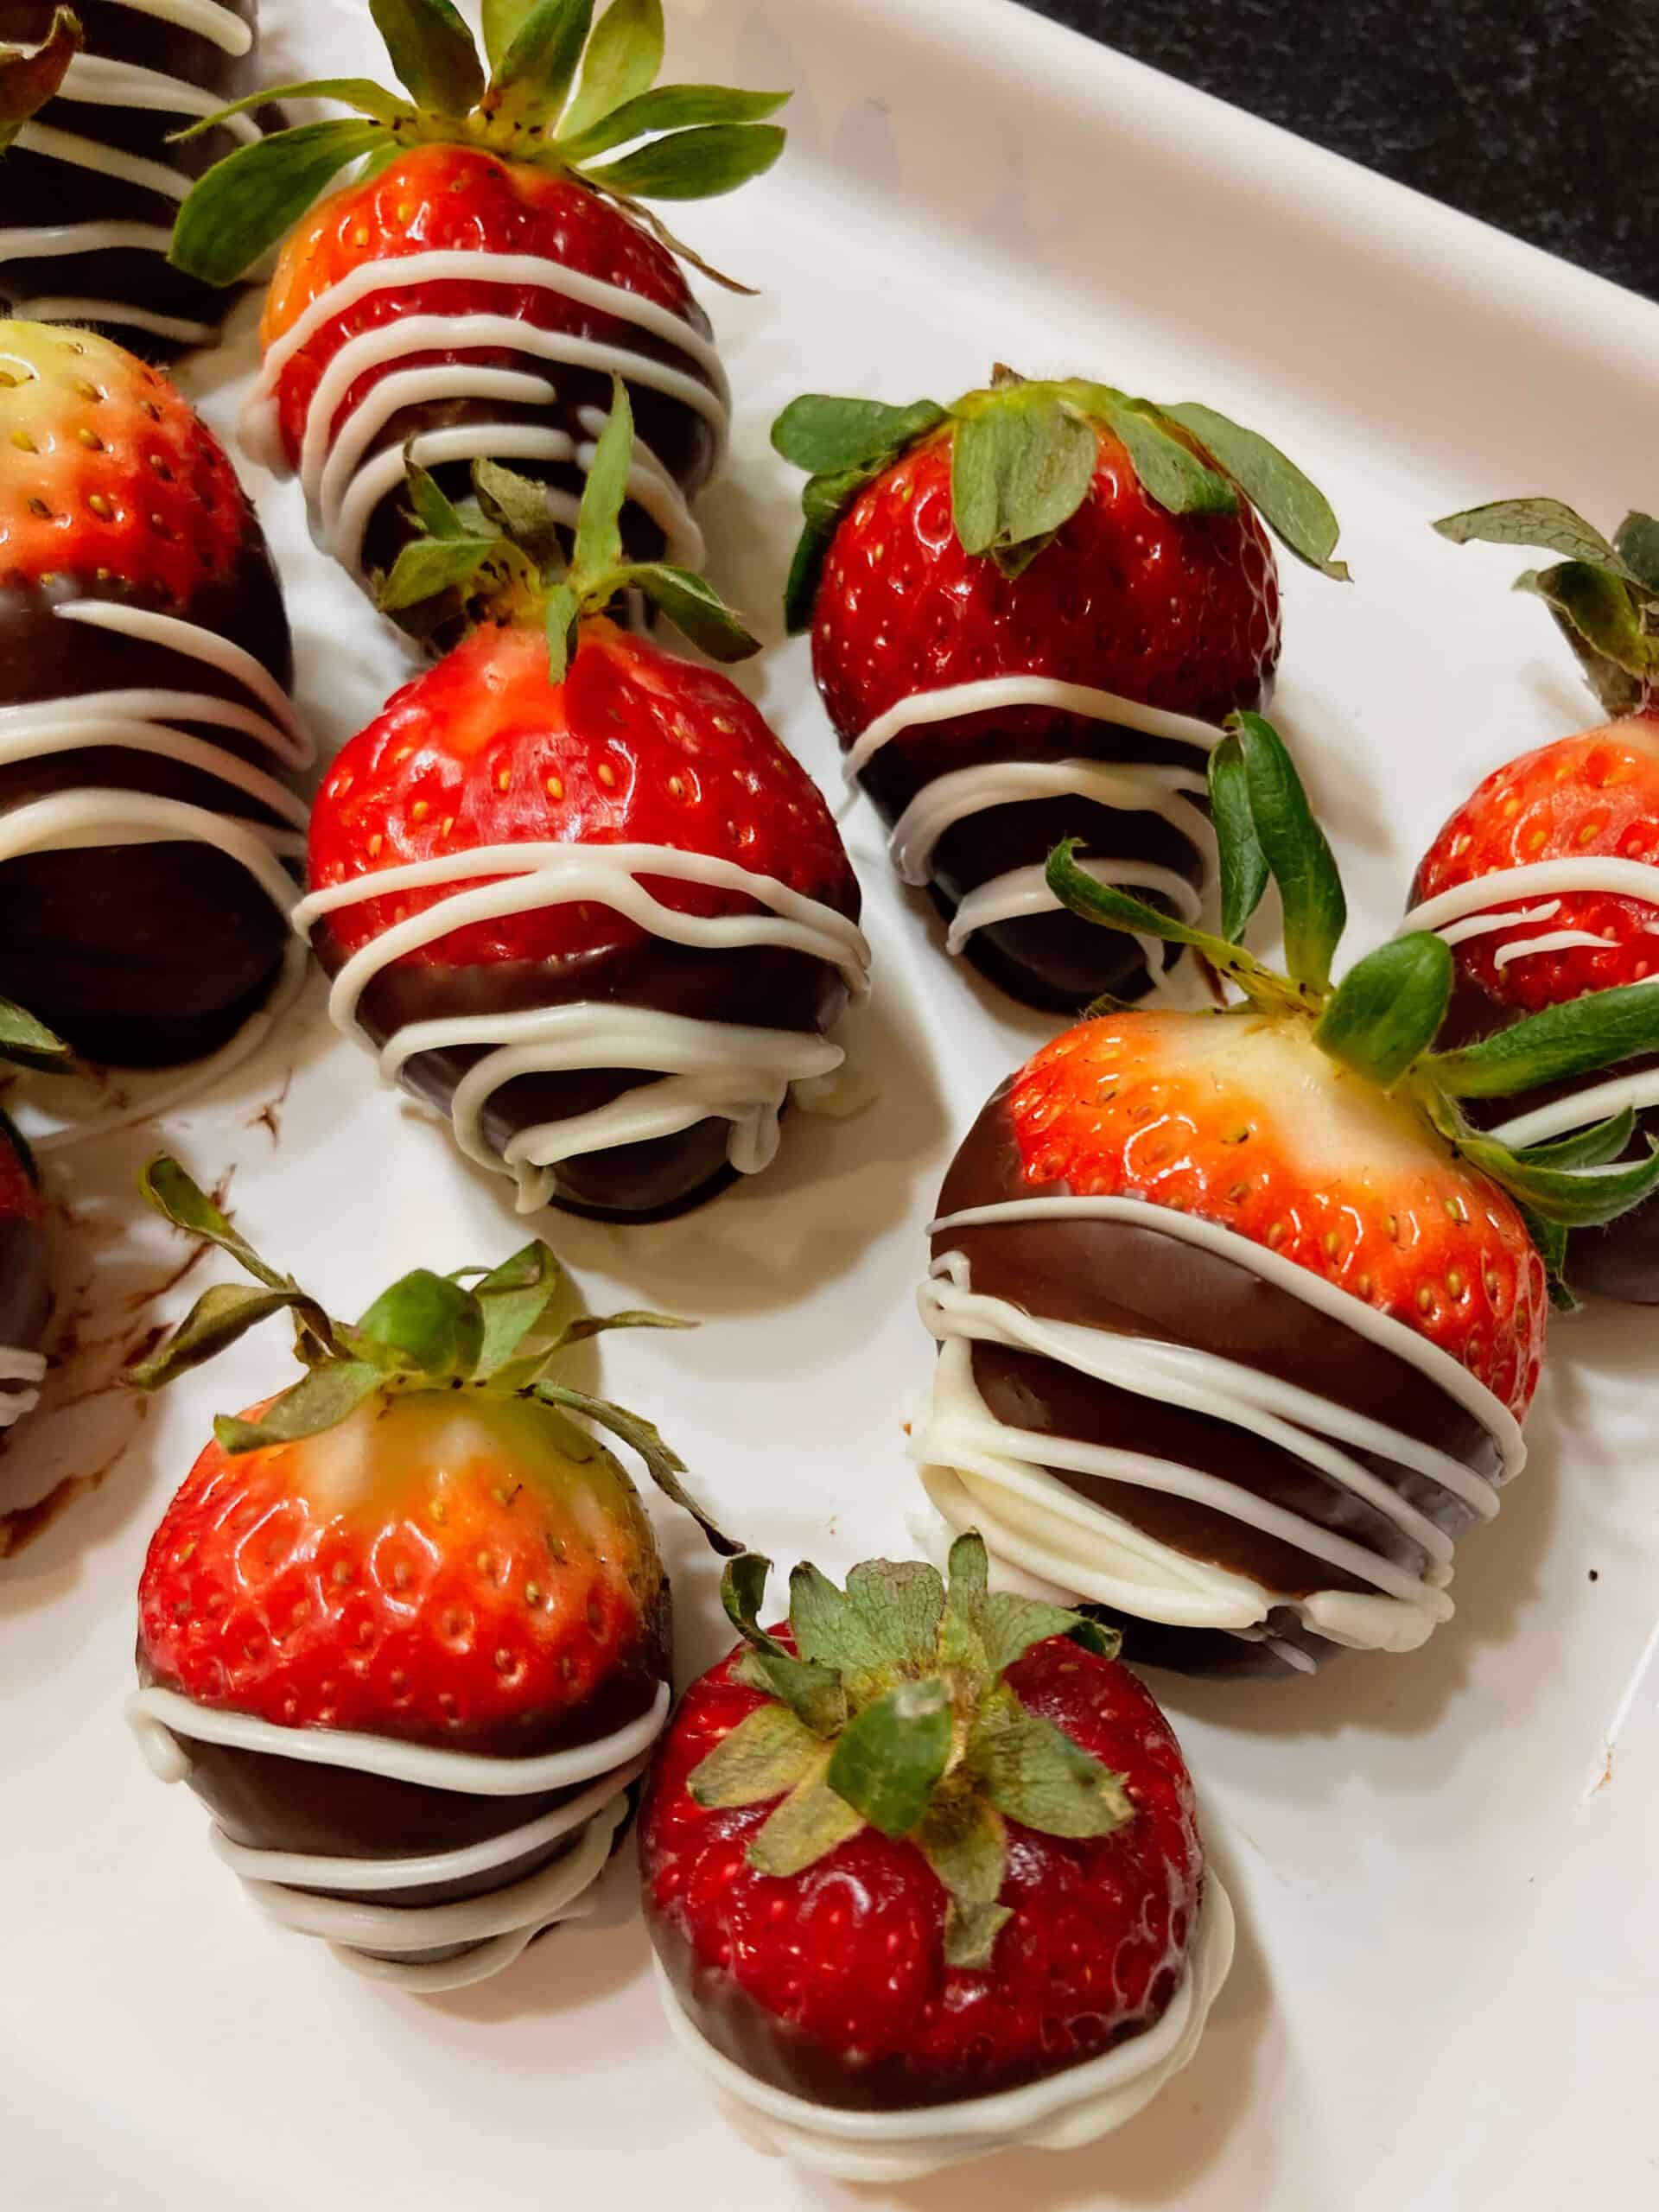 How to Make Chocolate Covered Strawberries 1